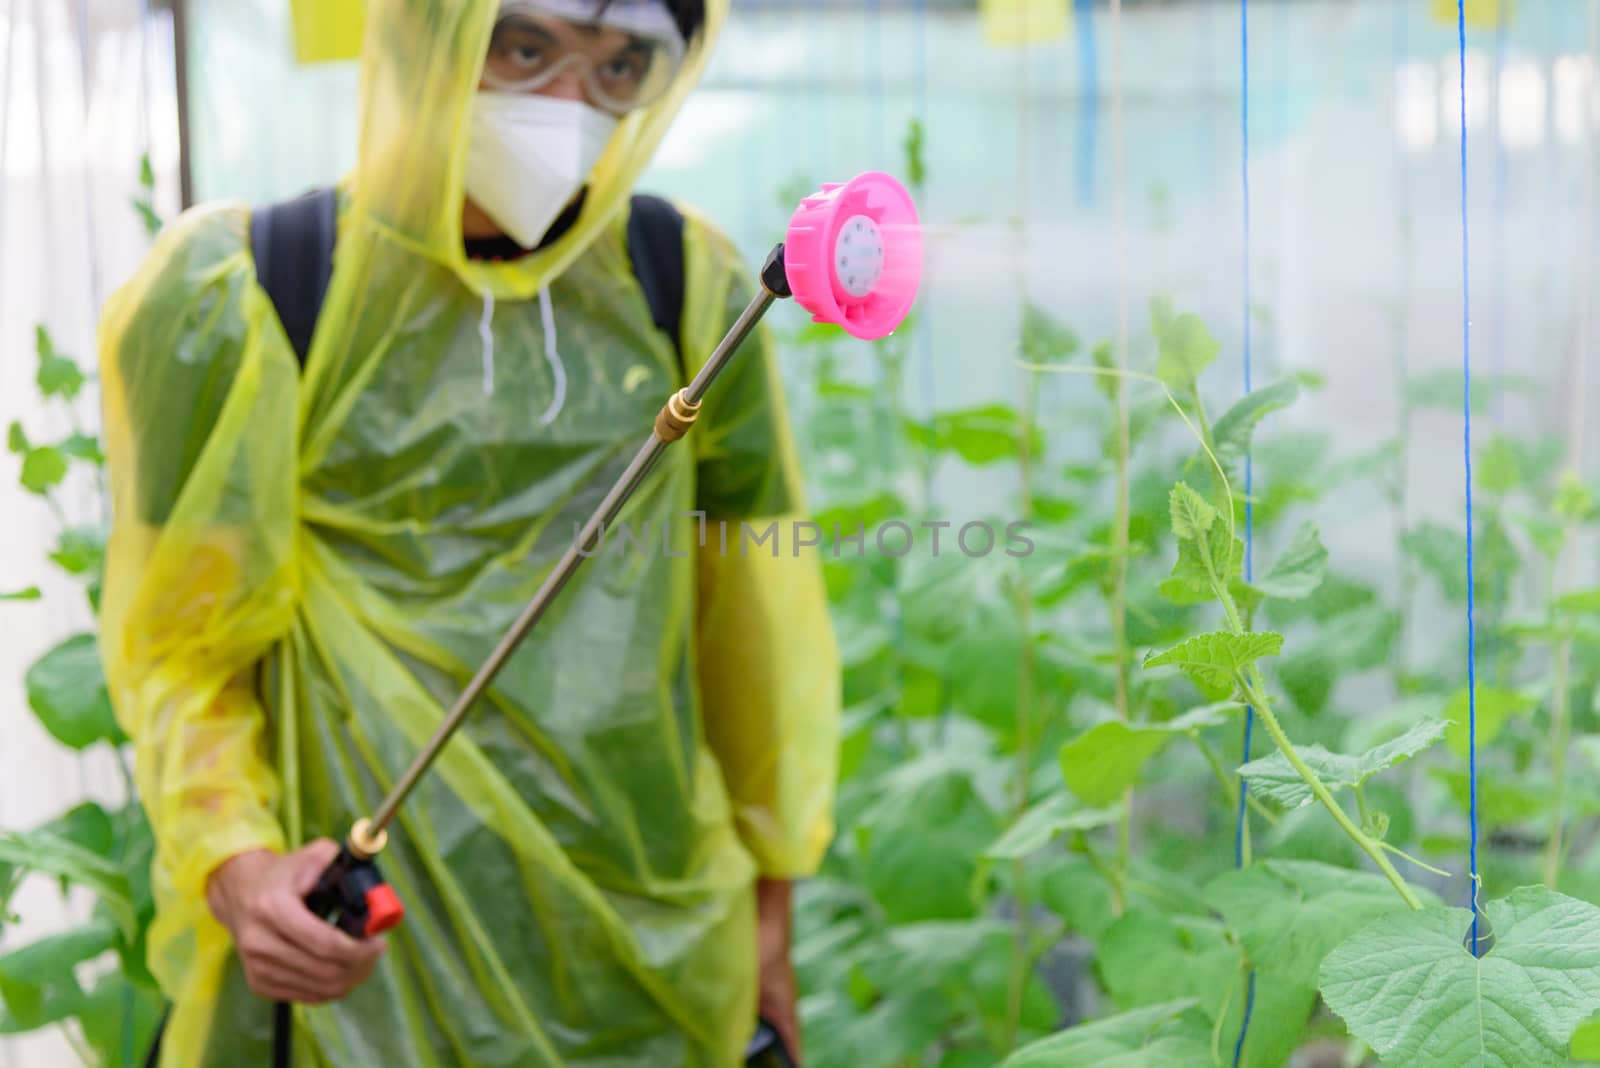 Farmer spraying the Insecticide in melon farm for protect it from insecs